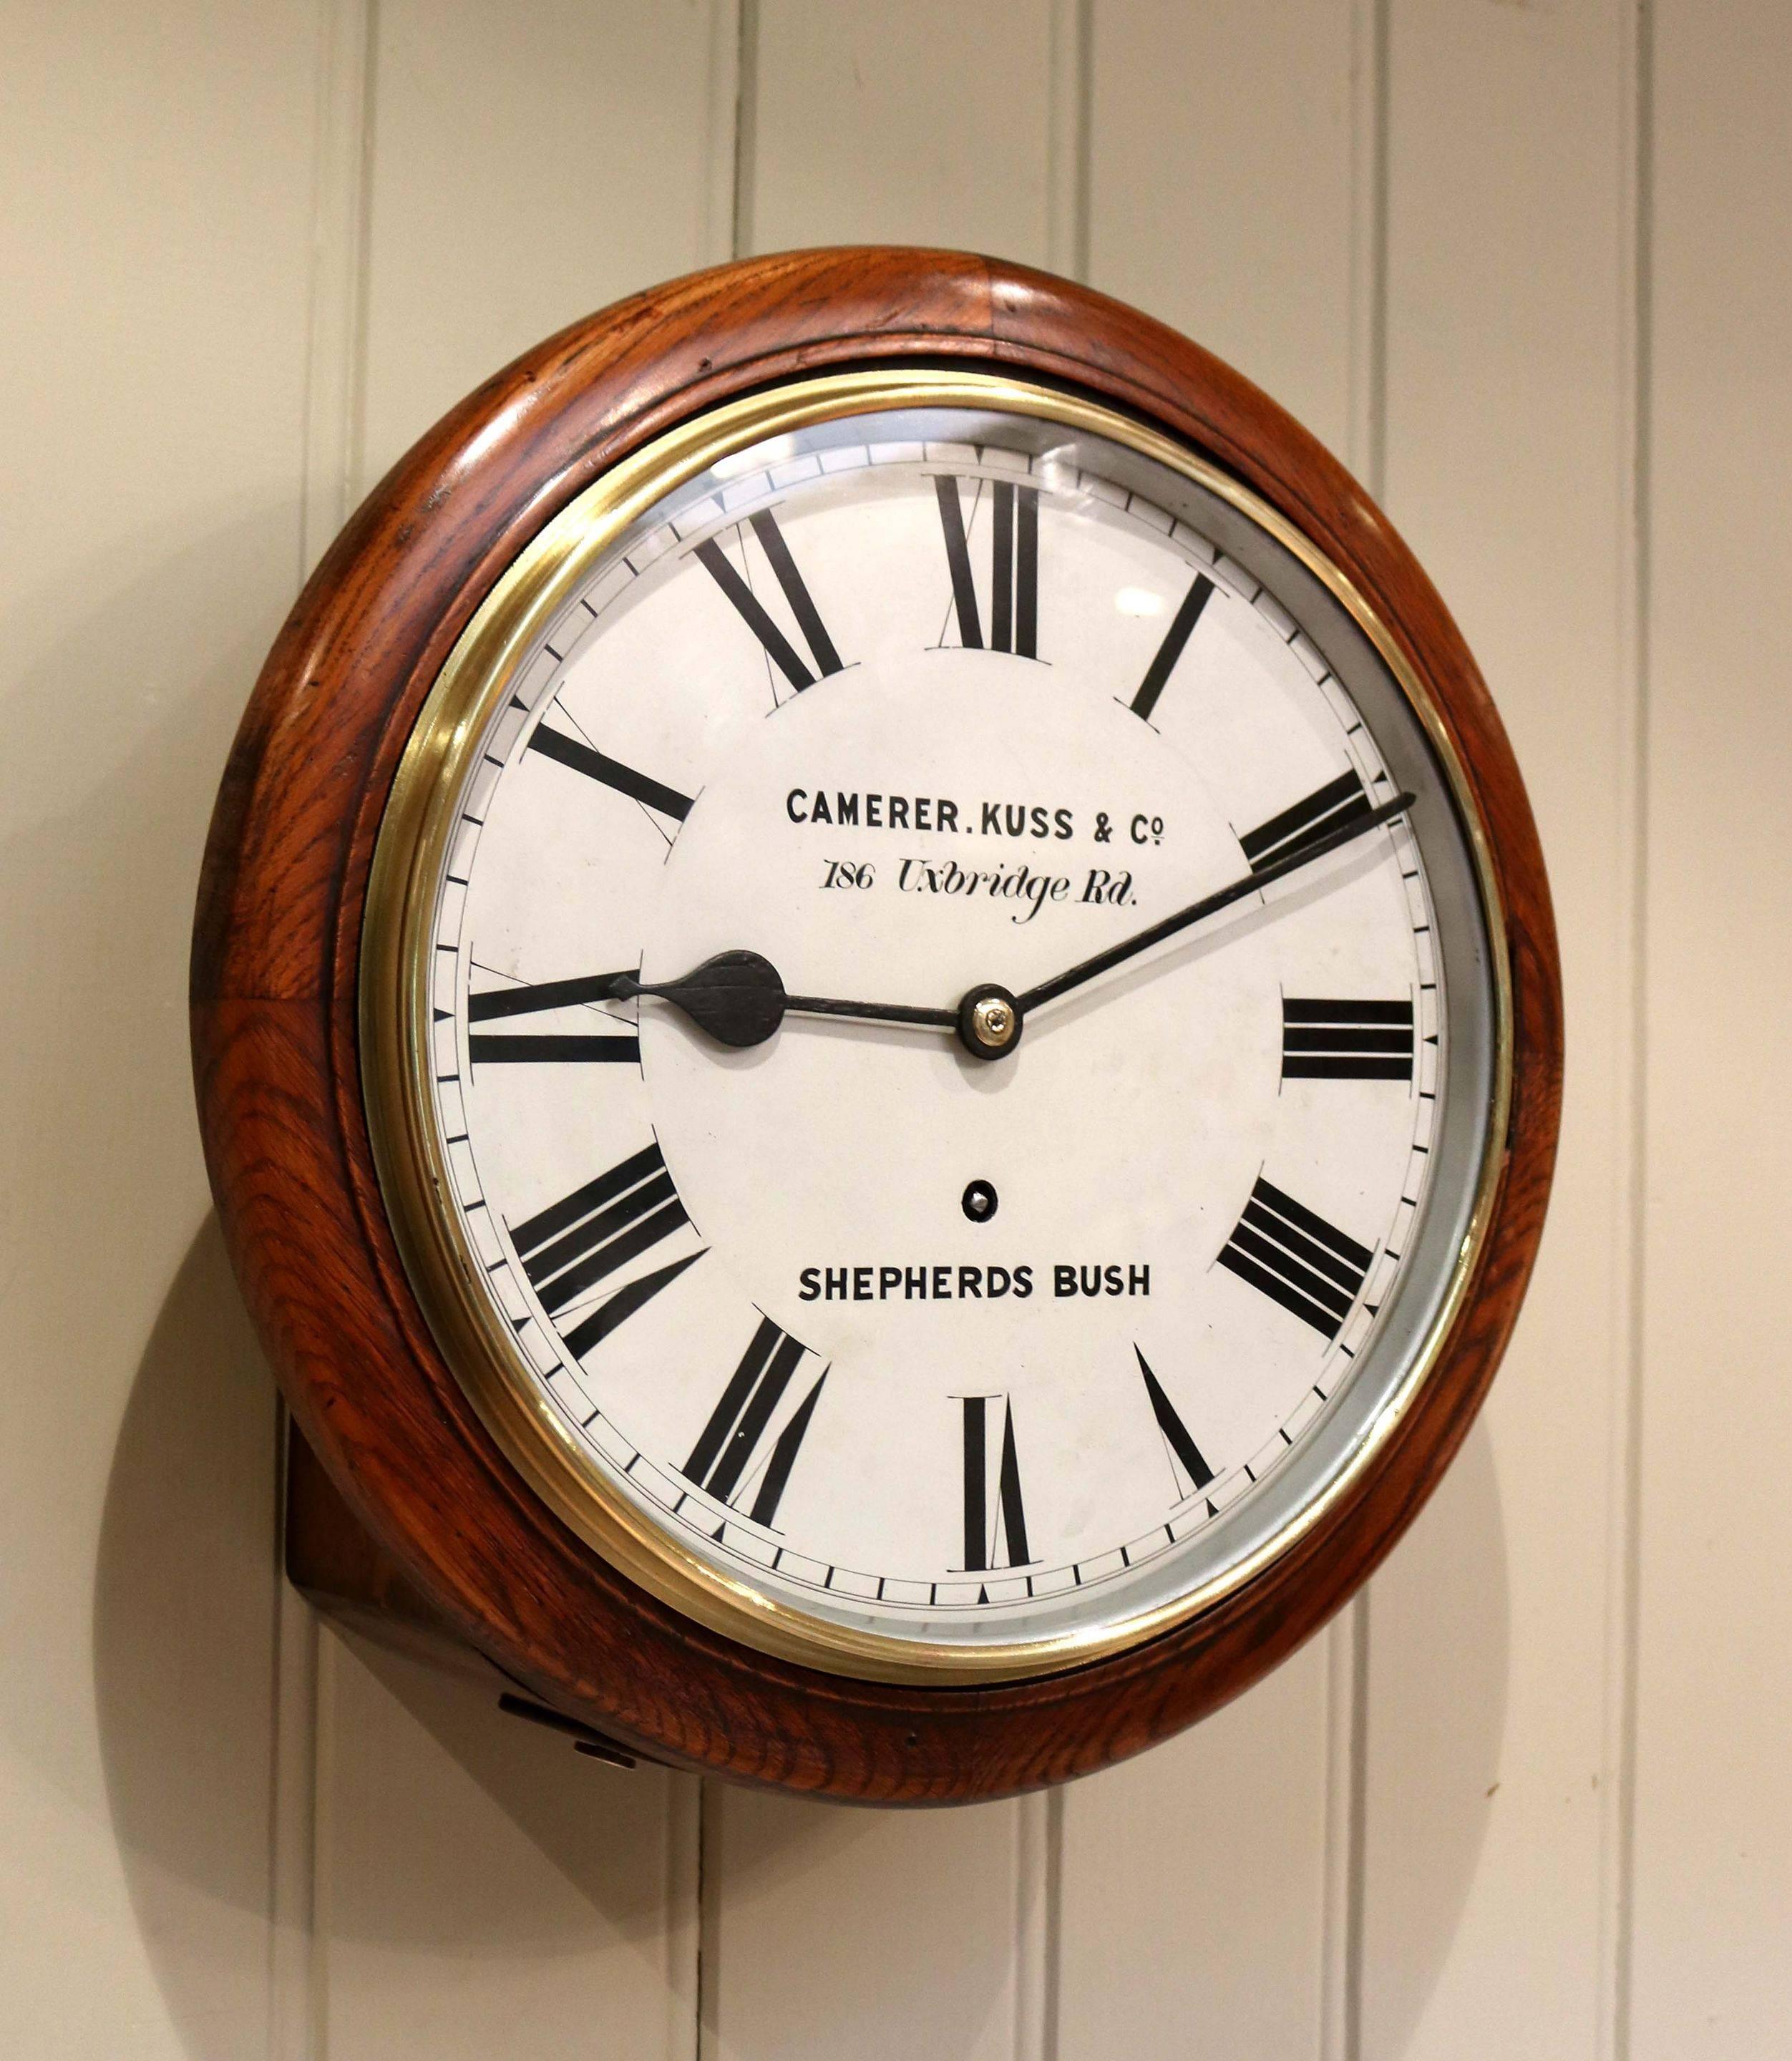 Late 19th century dial clock. It has a solid oak case the white painted dial is signed by the retailers Camerer Kuss of Shepherds Bush and has a polished and lacquered brass bezel. It has 8 day spring pendulum movement. Measure: 12”.
The